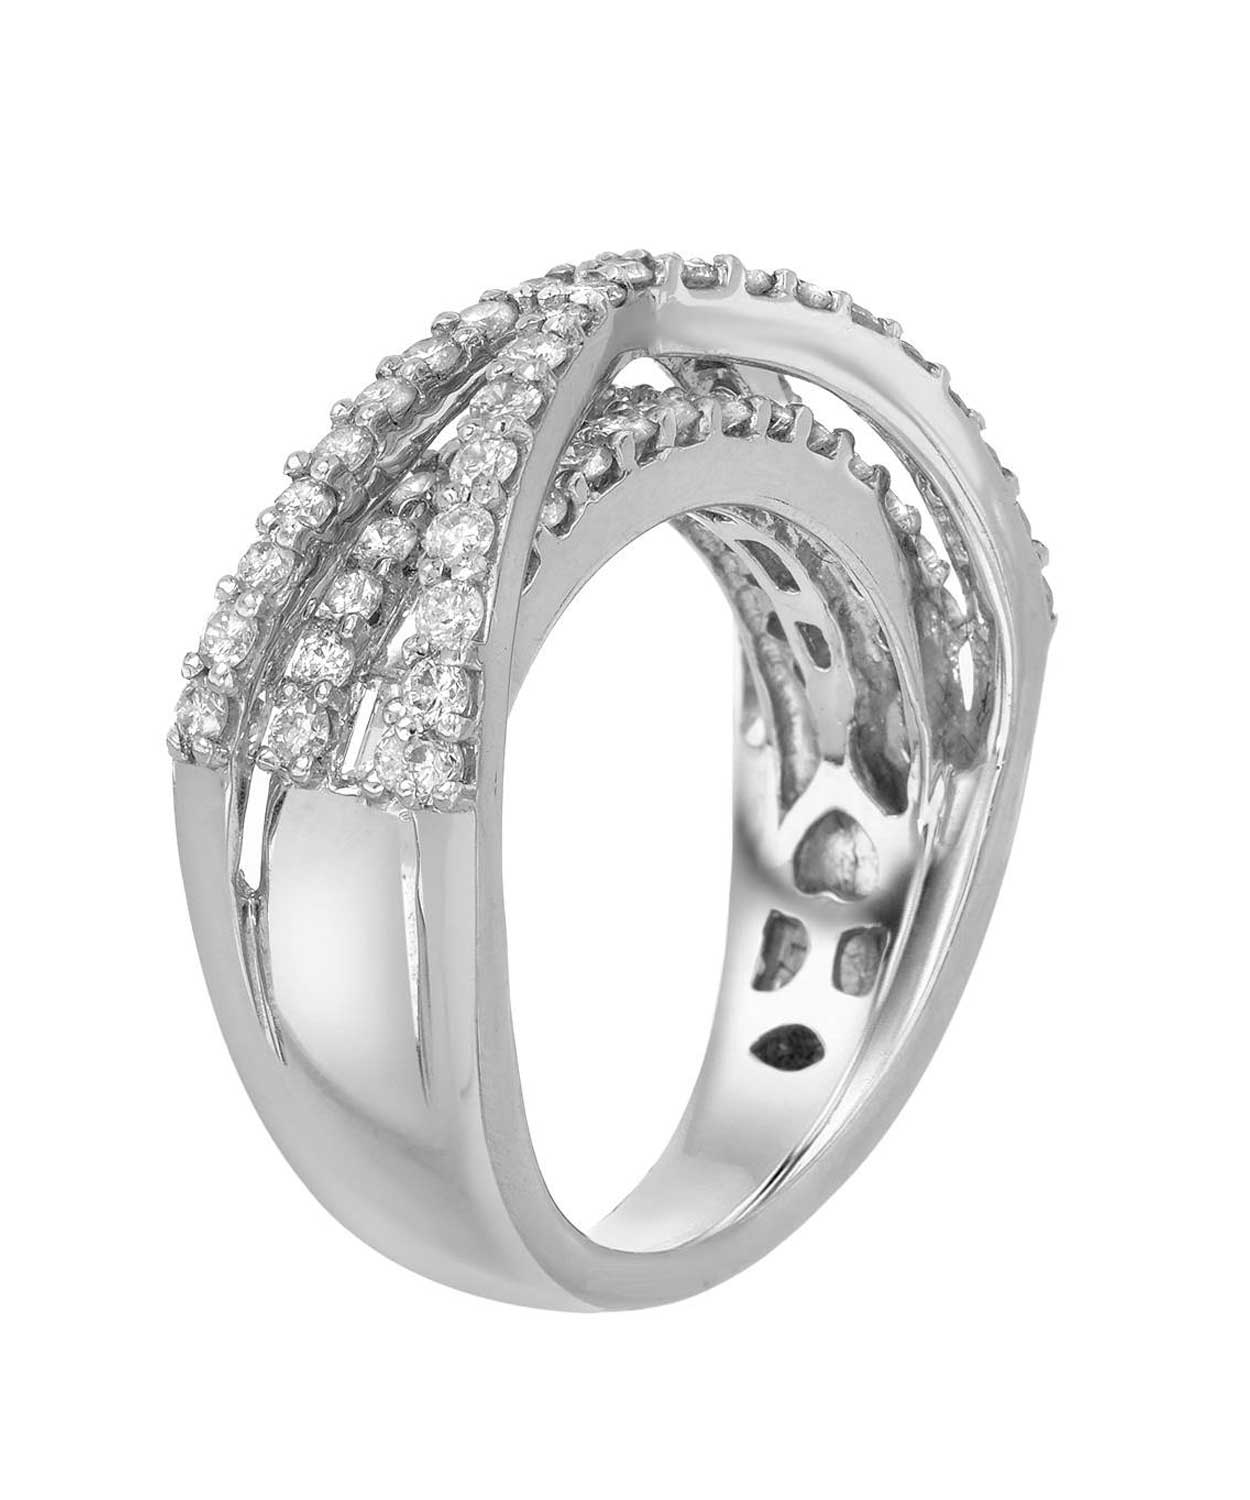 Signature Collection 1.60 ctw Diamond 18k White Gold Intertwined Ring View 2